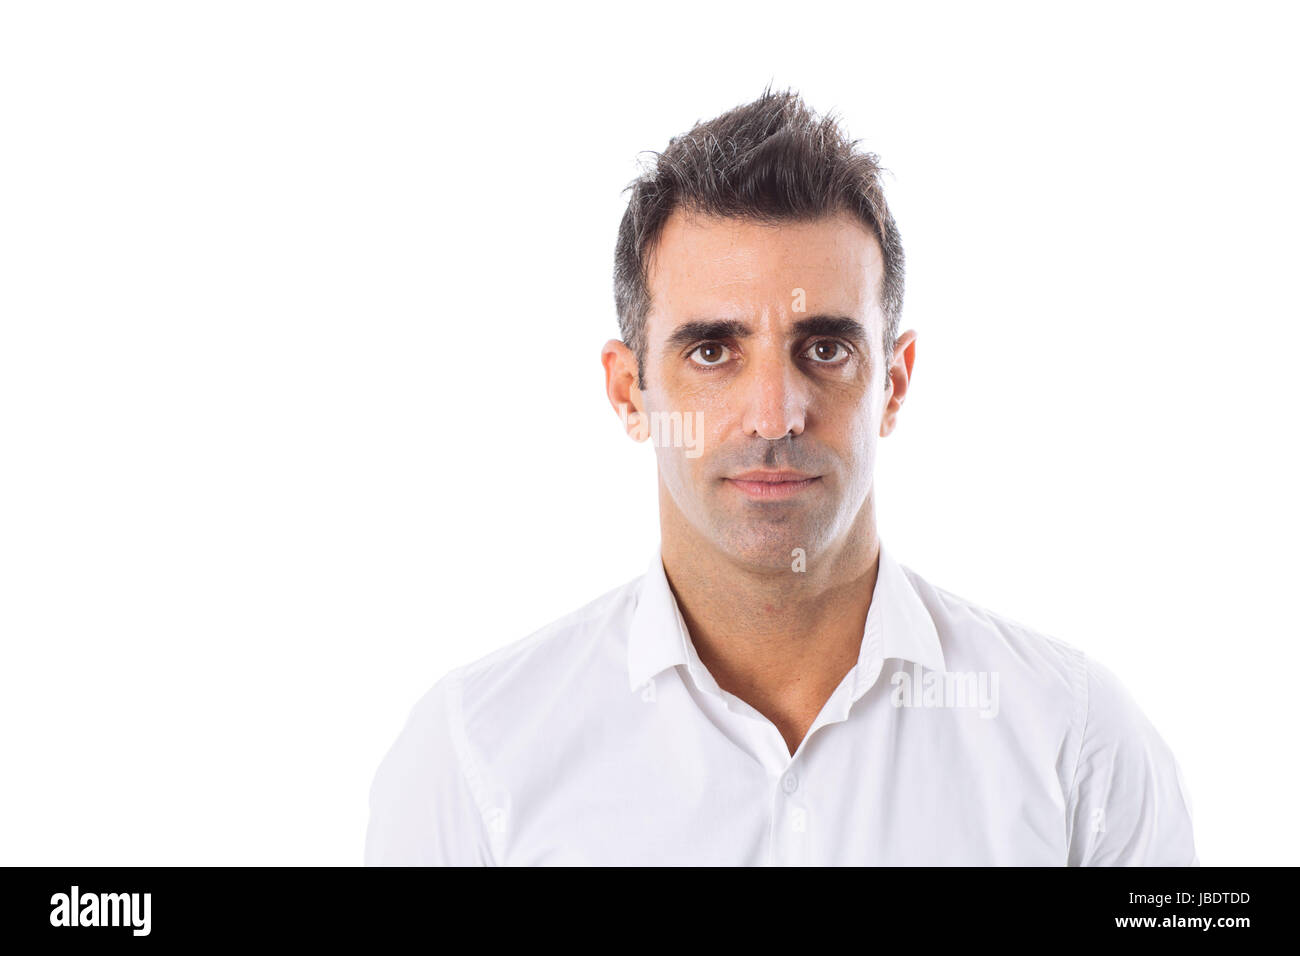 A 35 - 40 years old man probably a CEO caucasian dark hair cool modern look a serious face studio shot with white background Stock Photo